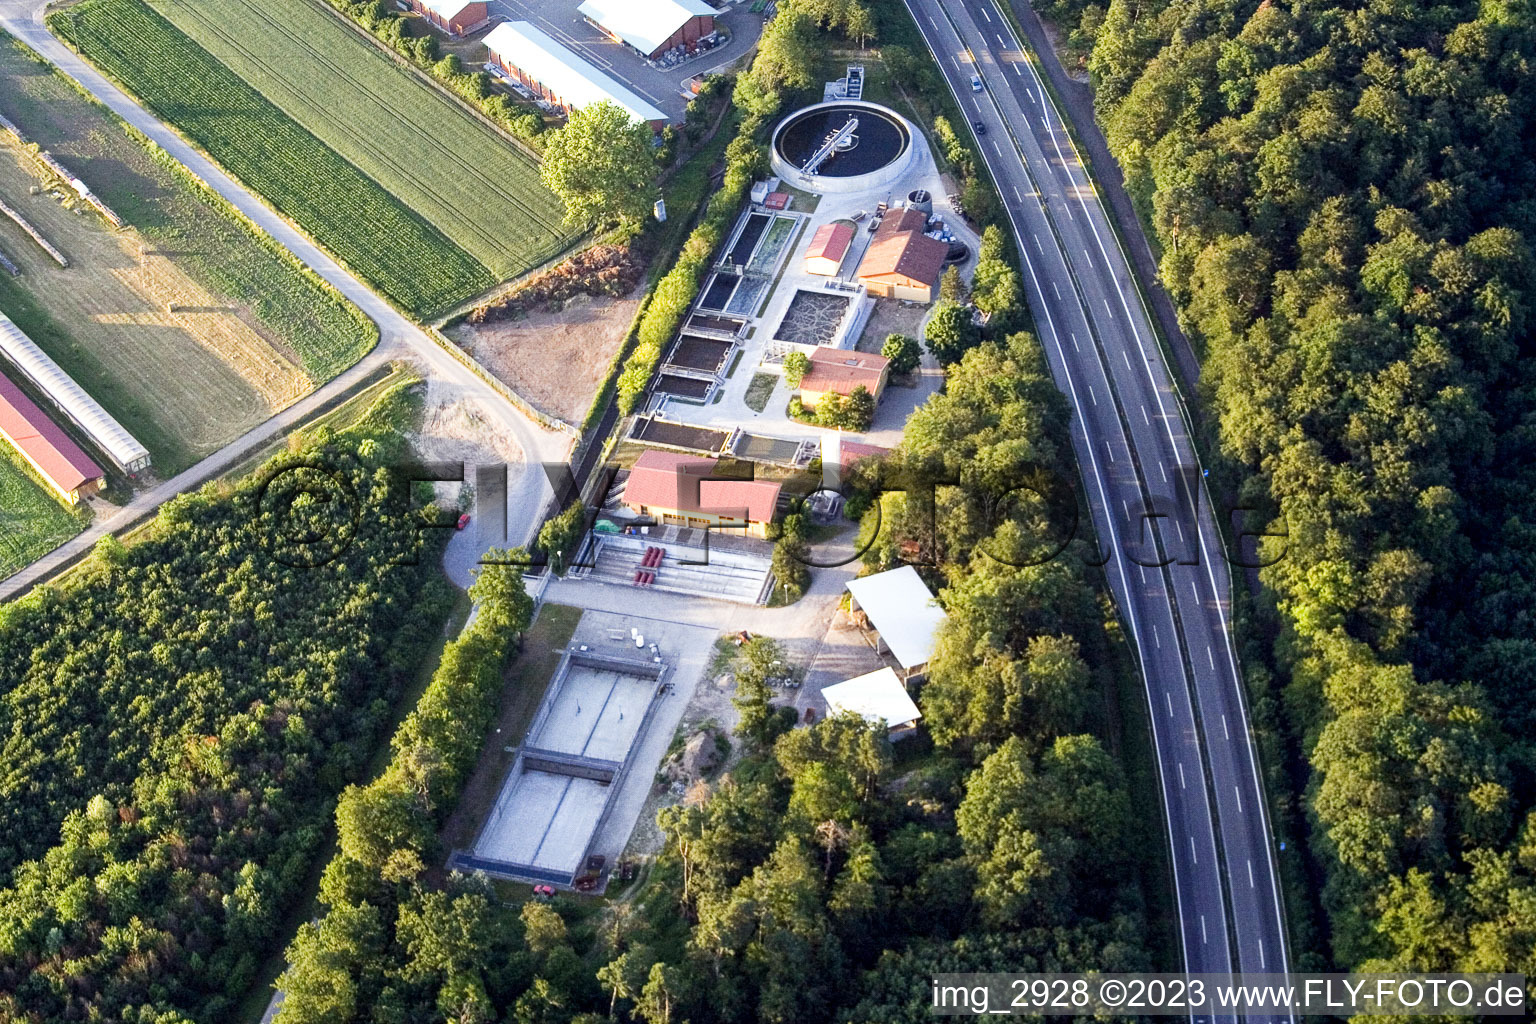 Oblique view of Sewage treatment plant in Kandel in the state Rhineland-Palatinate, Germany